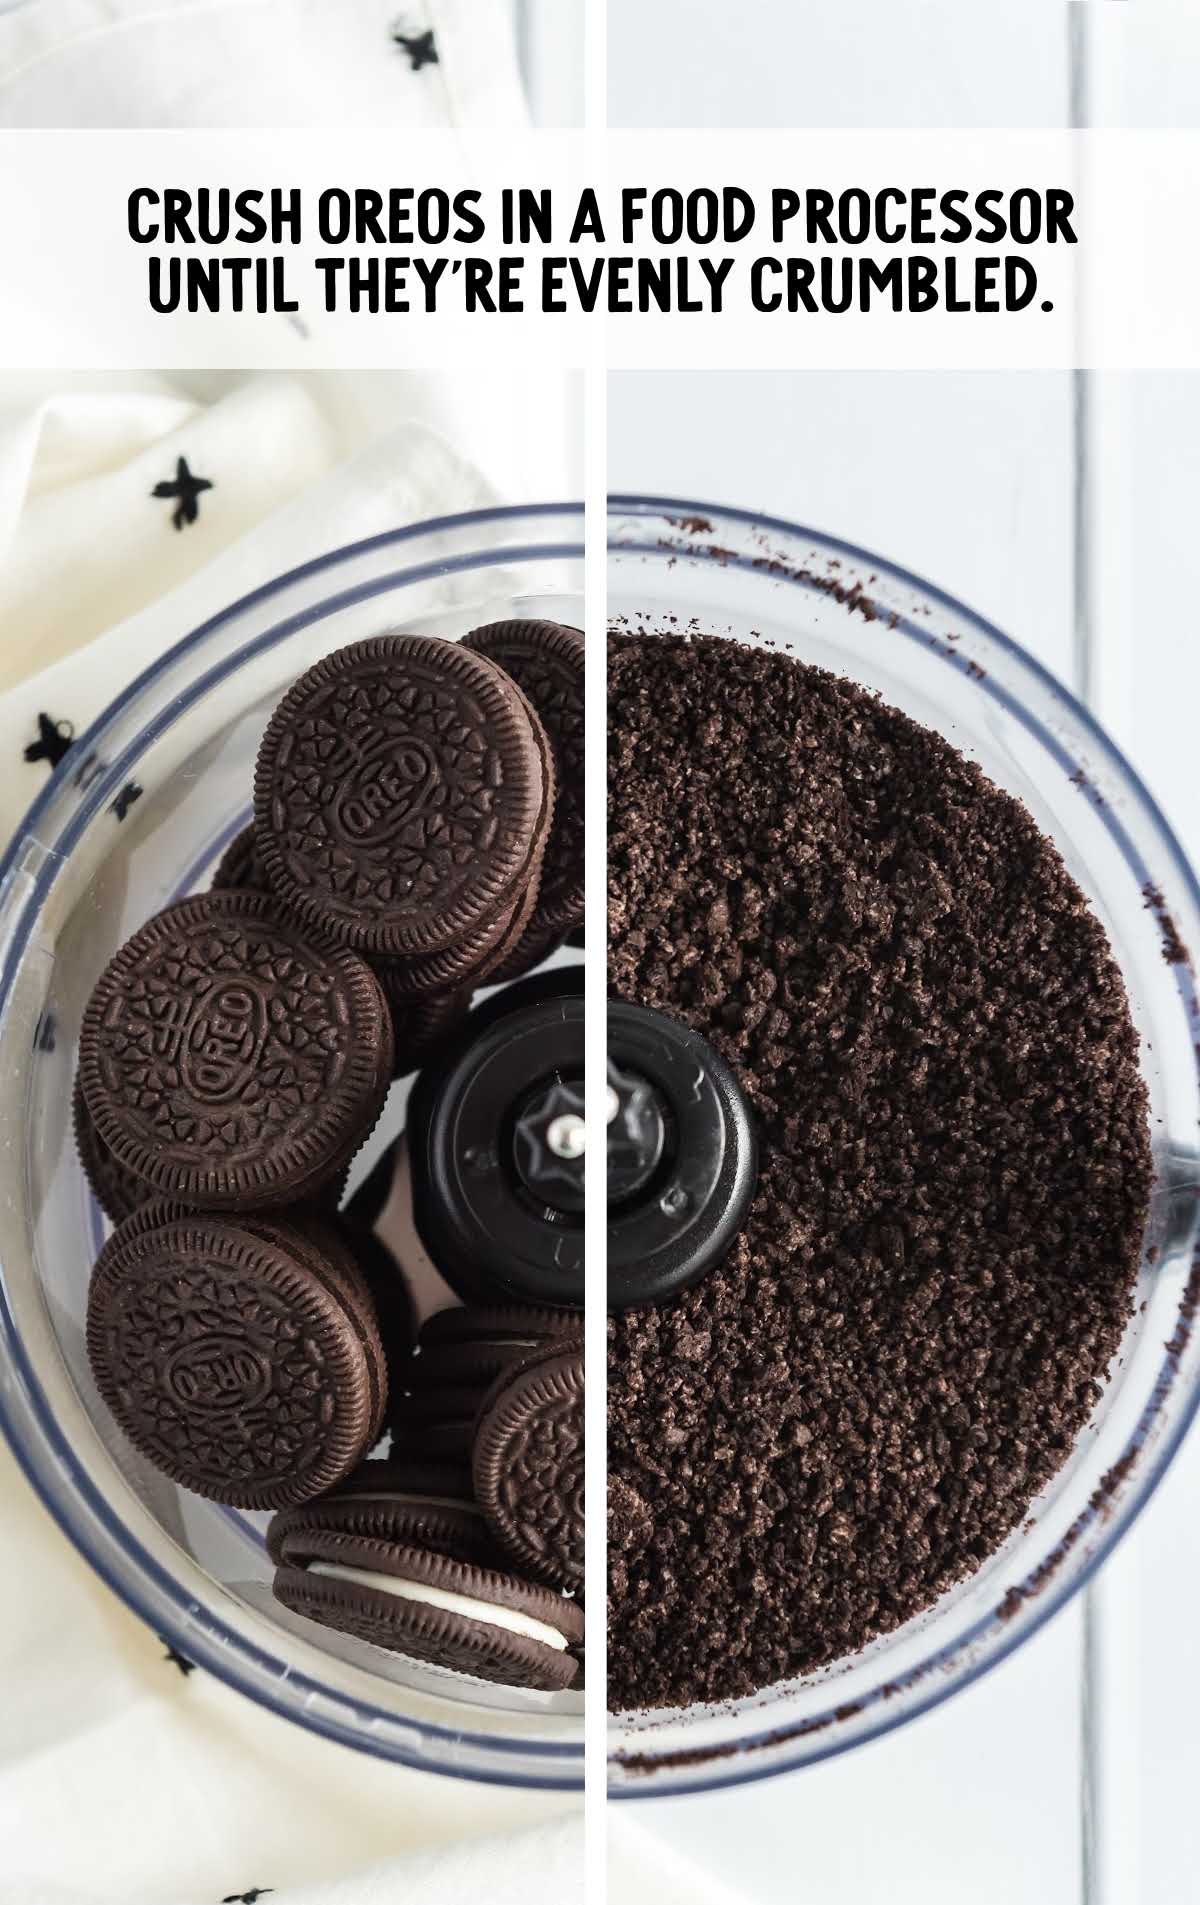 Oreos crushed in a food processor